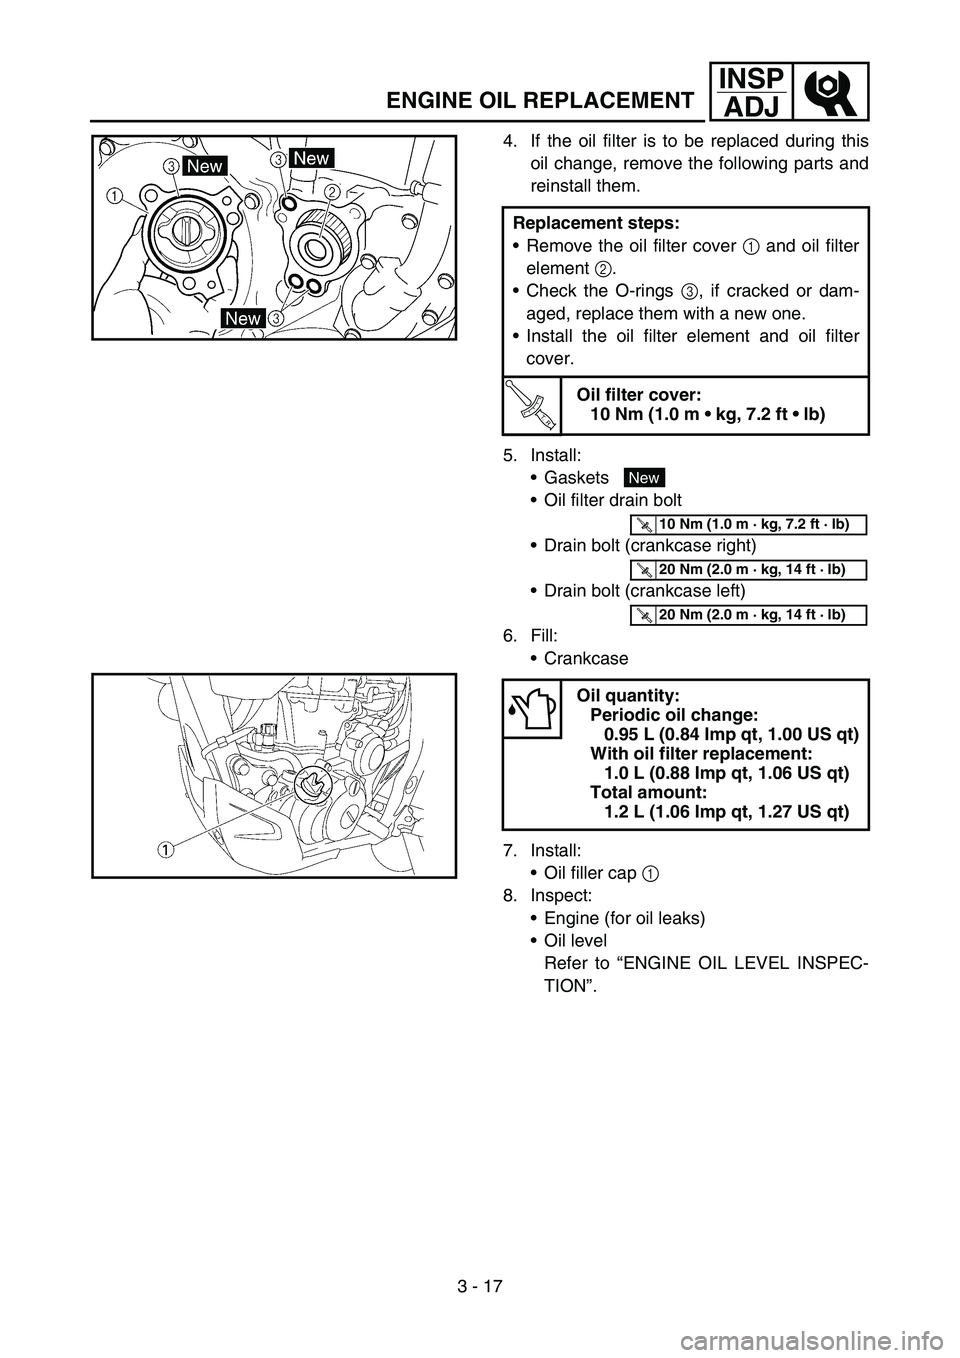 YAMAHA WR 450F 2007  Owners Manual 3 - 17
INSP
ADJ
ENGINE OIL REPLACEMENT
4. If the oil filter is to be replaced during this
oil change, remove the following parts and
reinstall them.
5. Install:
Gaskets
Oil filter drain bolt
Drain 